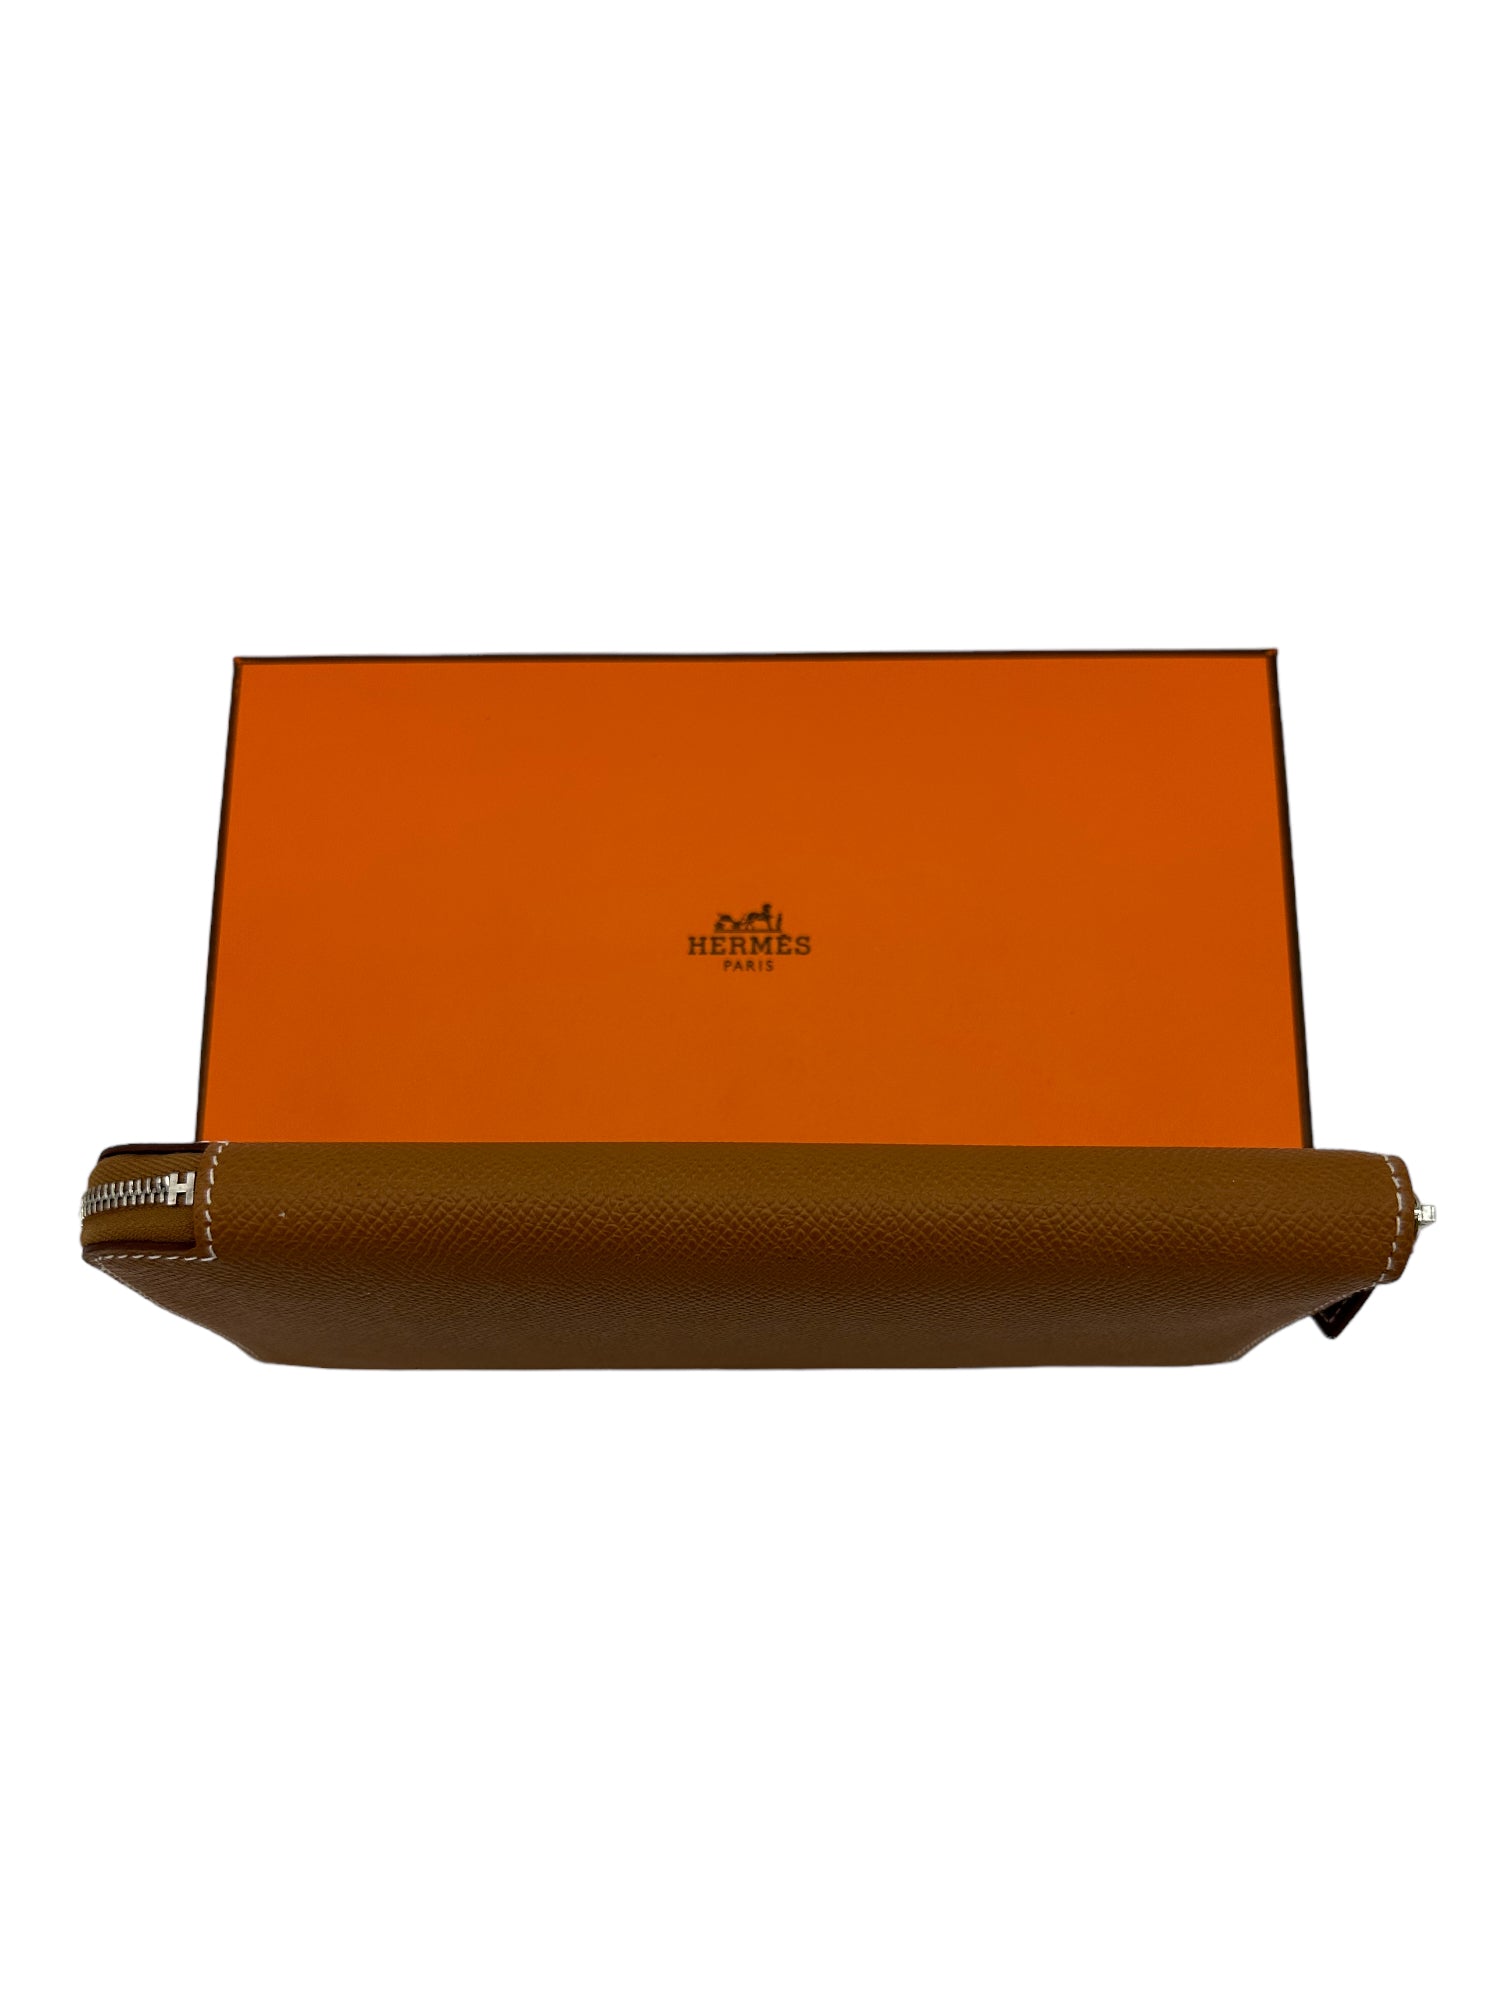 Hermés Brown Azap Classique Wallet - Genuine Design Luxury Consignment for Men. New & Pre-Owned Clothing, Shoes, & Accessories. Calgary, Canada